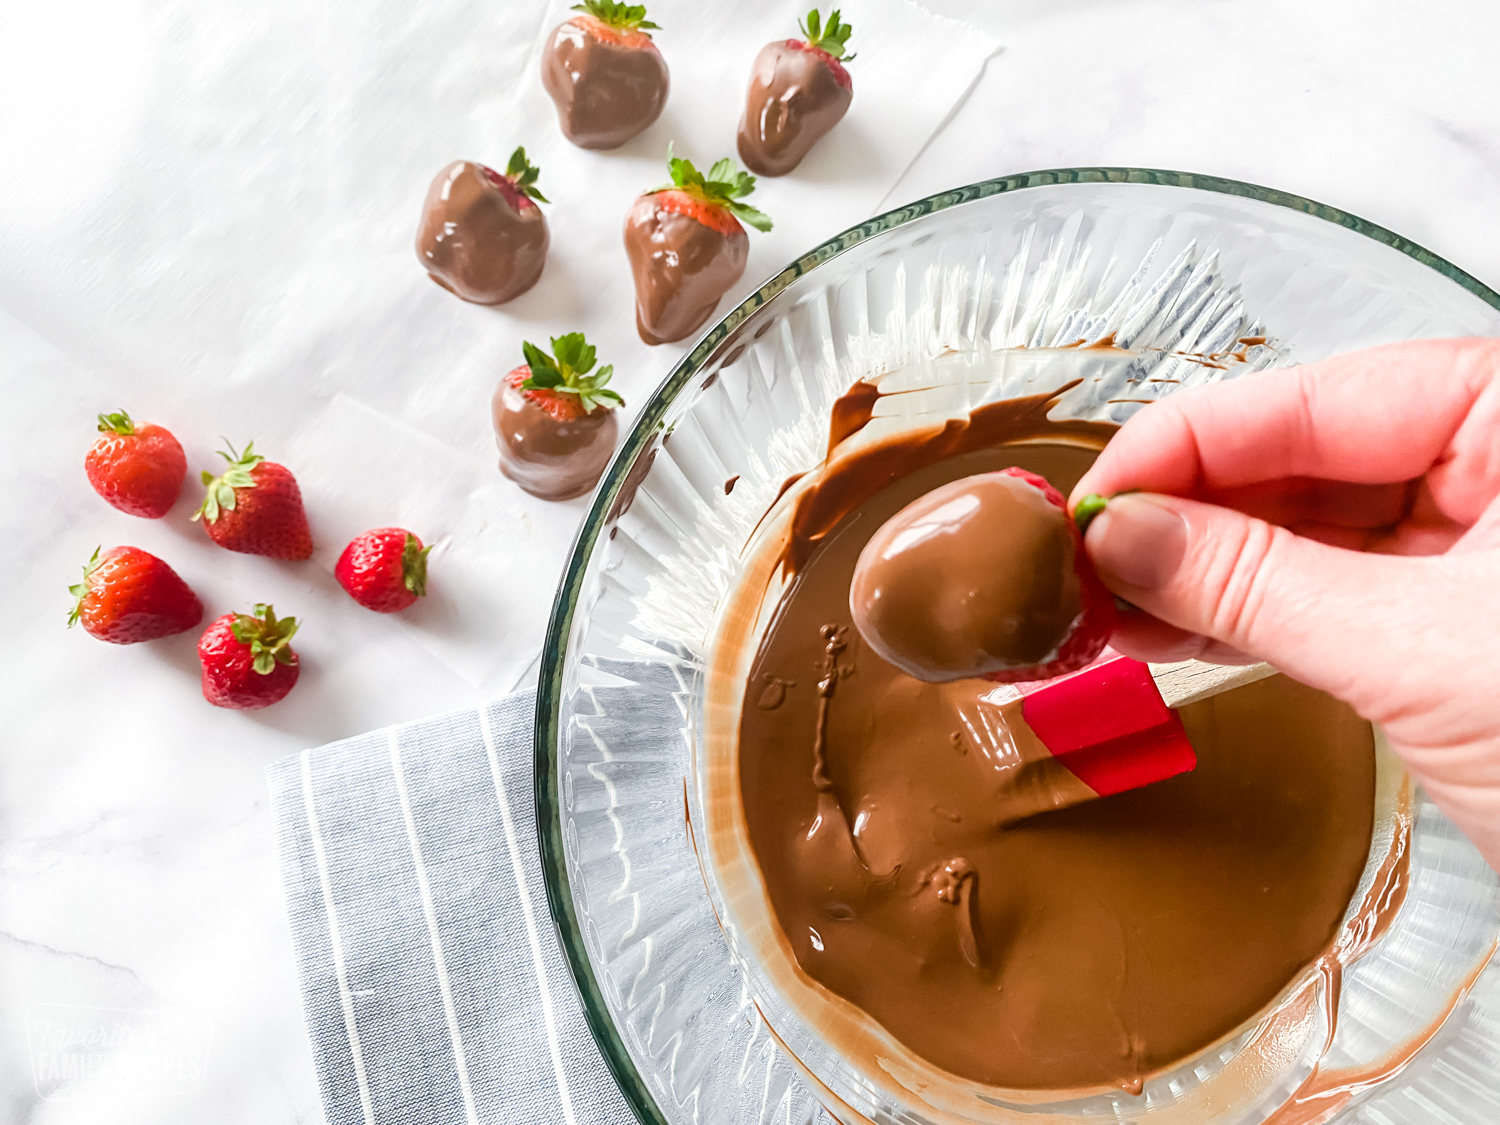 A chocolate covered strawberry being held with a hand.